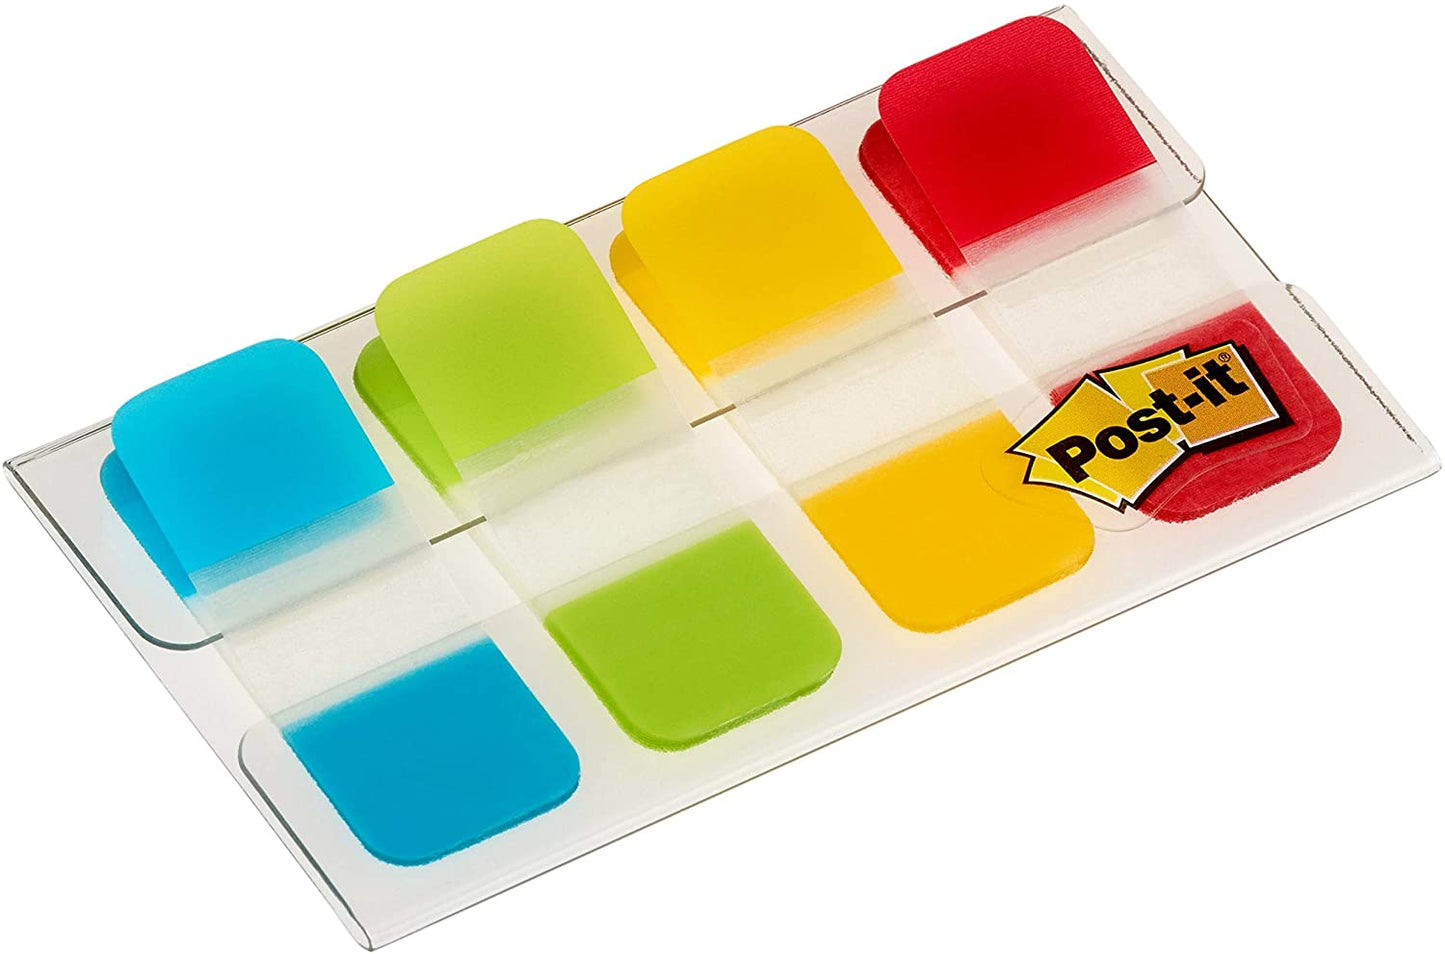 Post-it Tabs - 625 in Solid, Aqua, Lime, Yellow, Red, 10 Color, 40 Dispenser